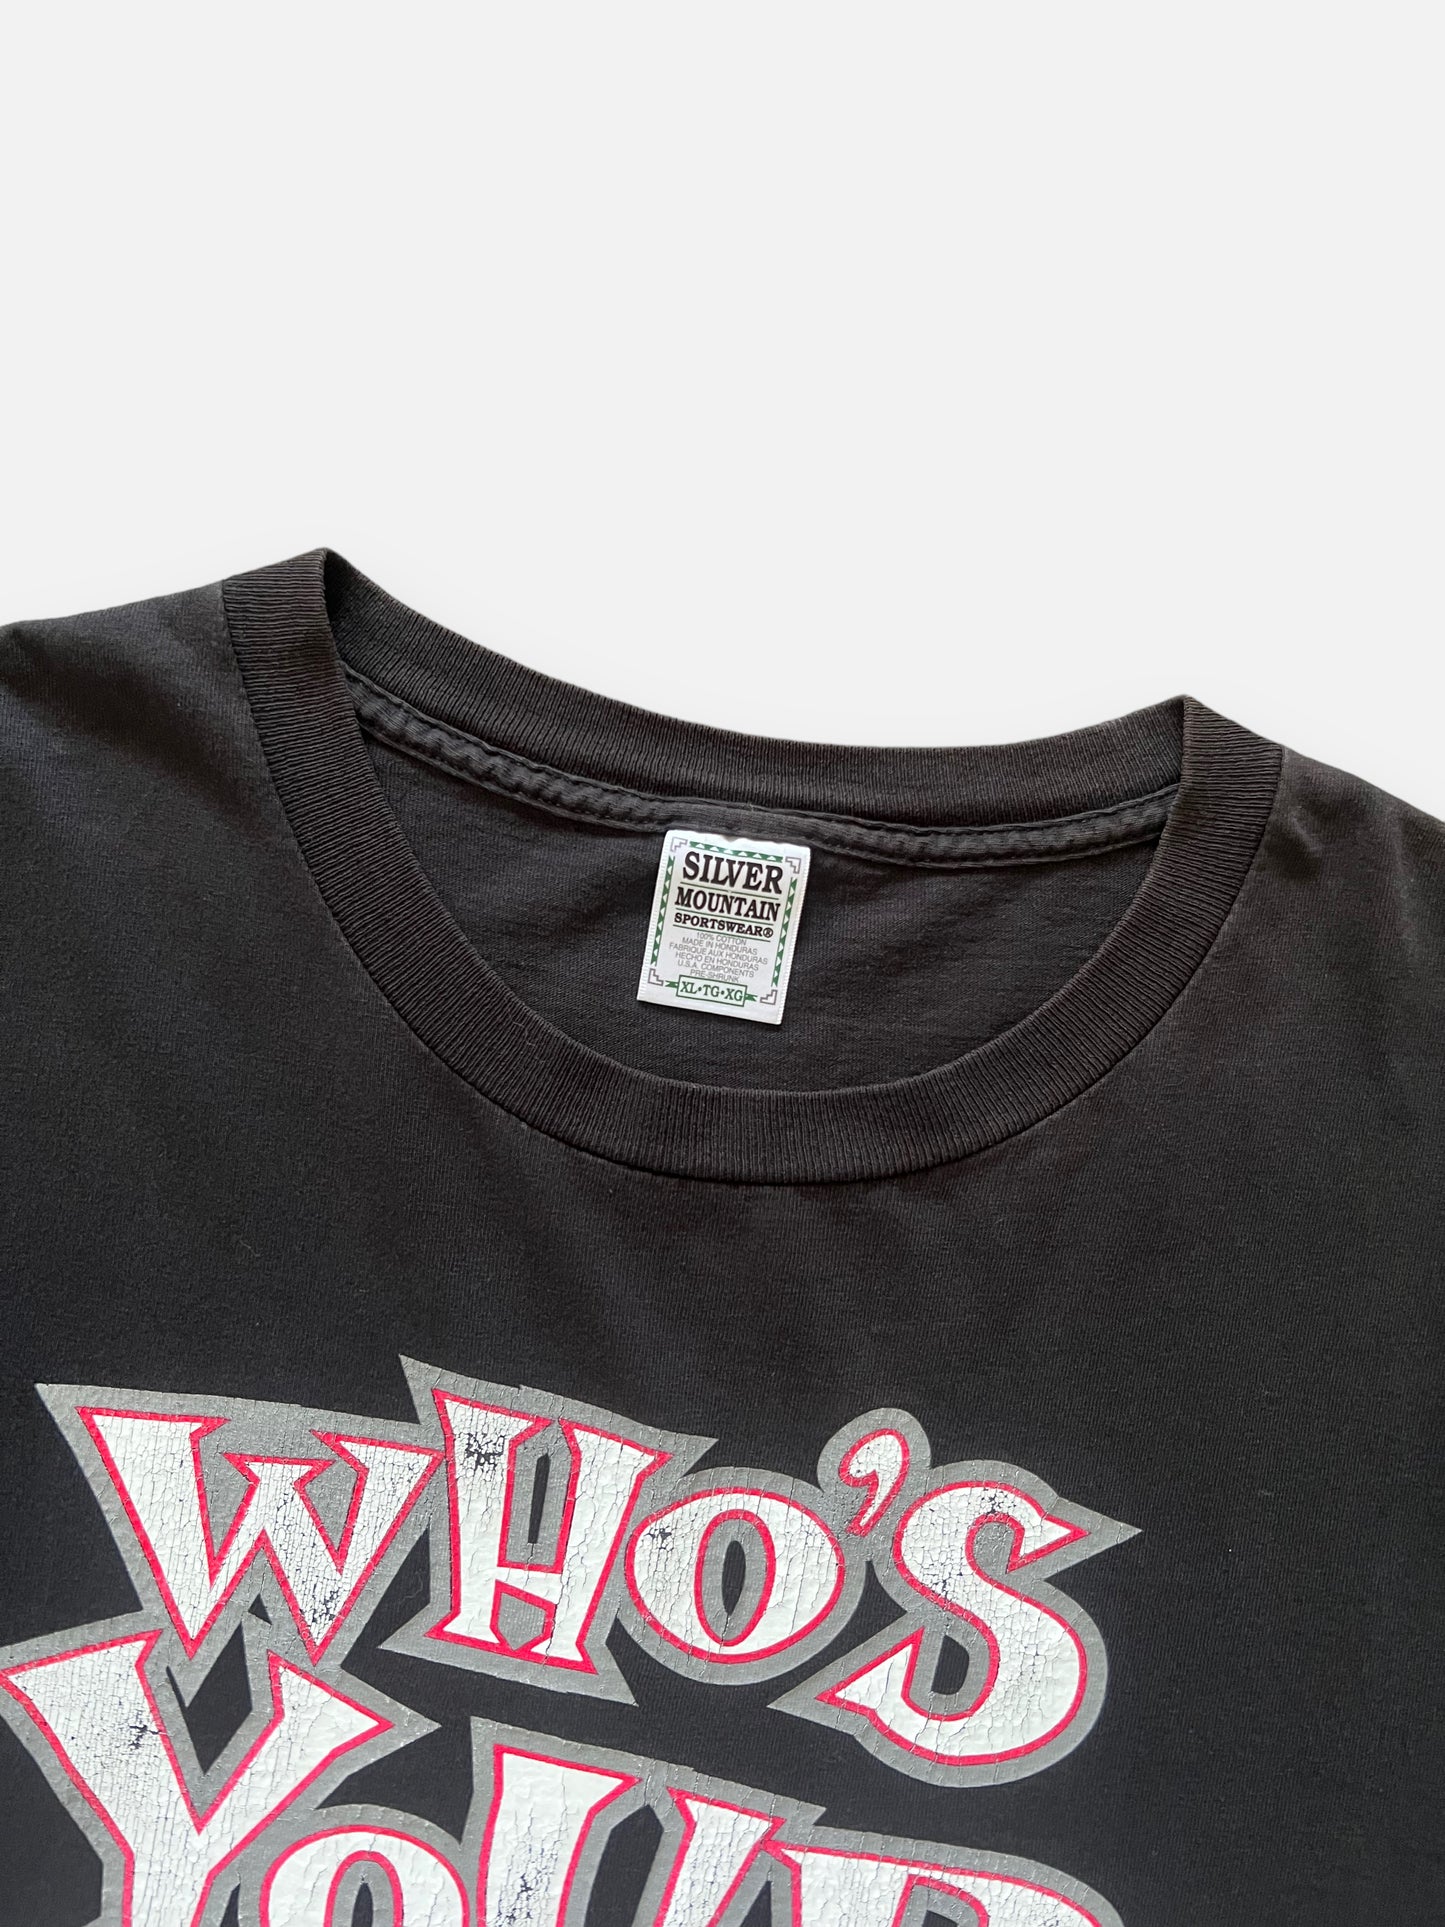 90s Who's Your Daddy Tee (XL)